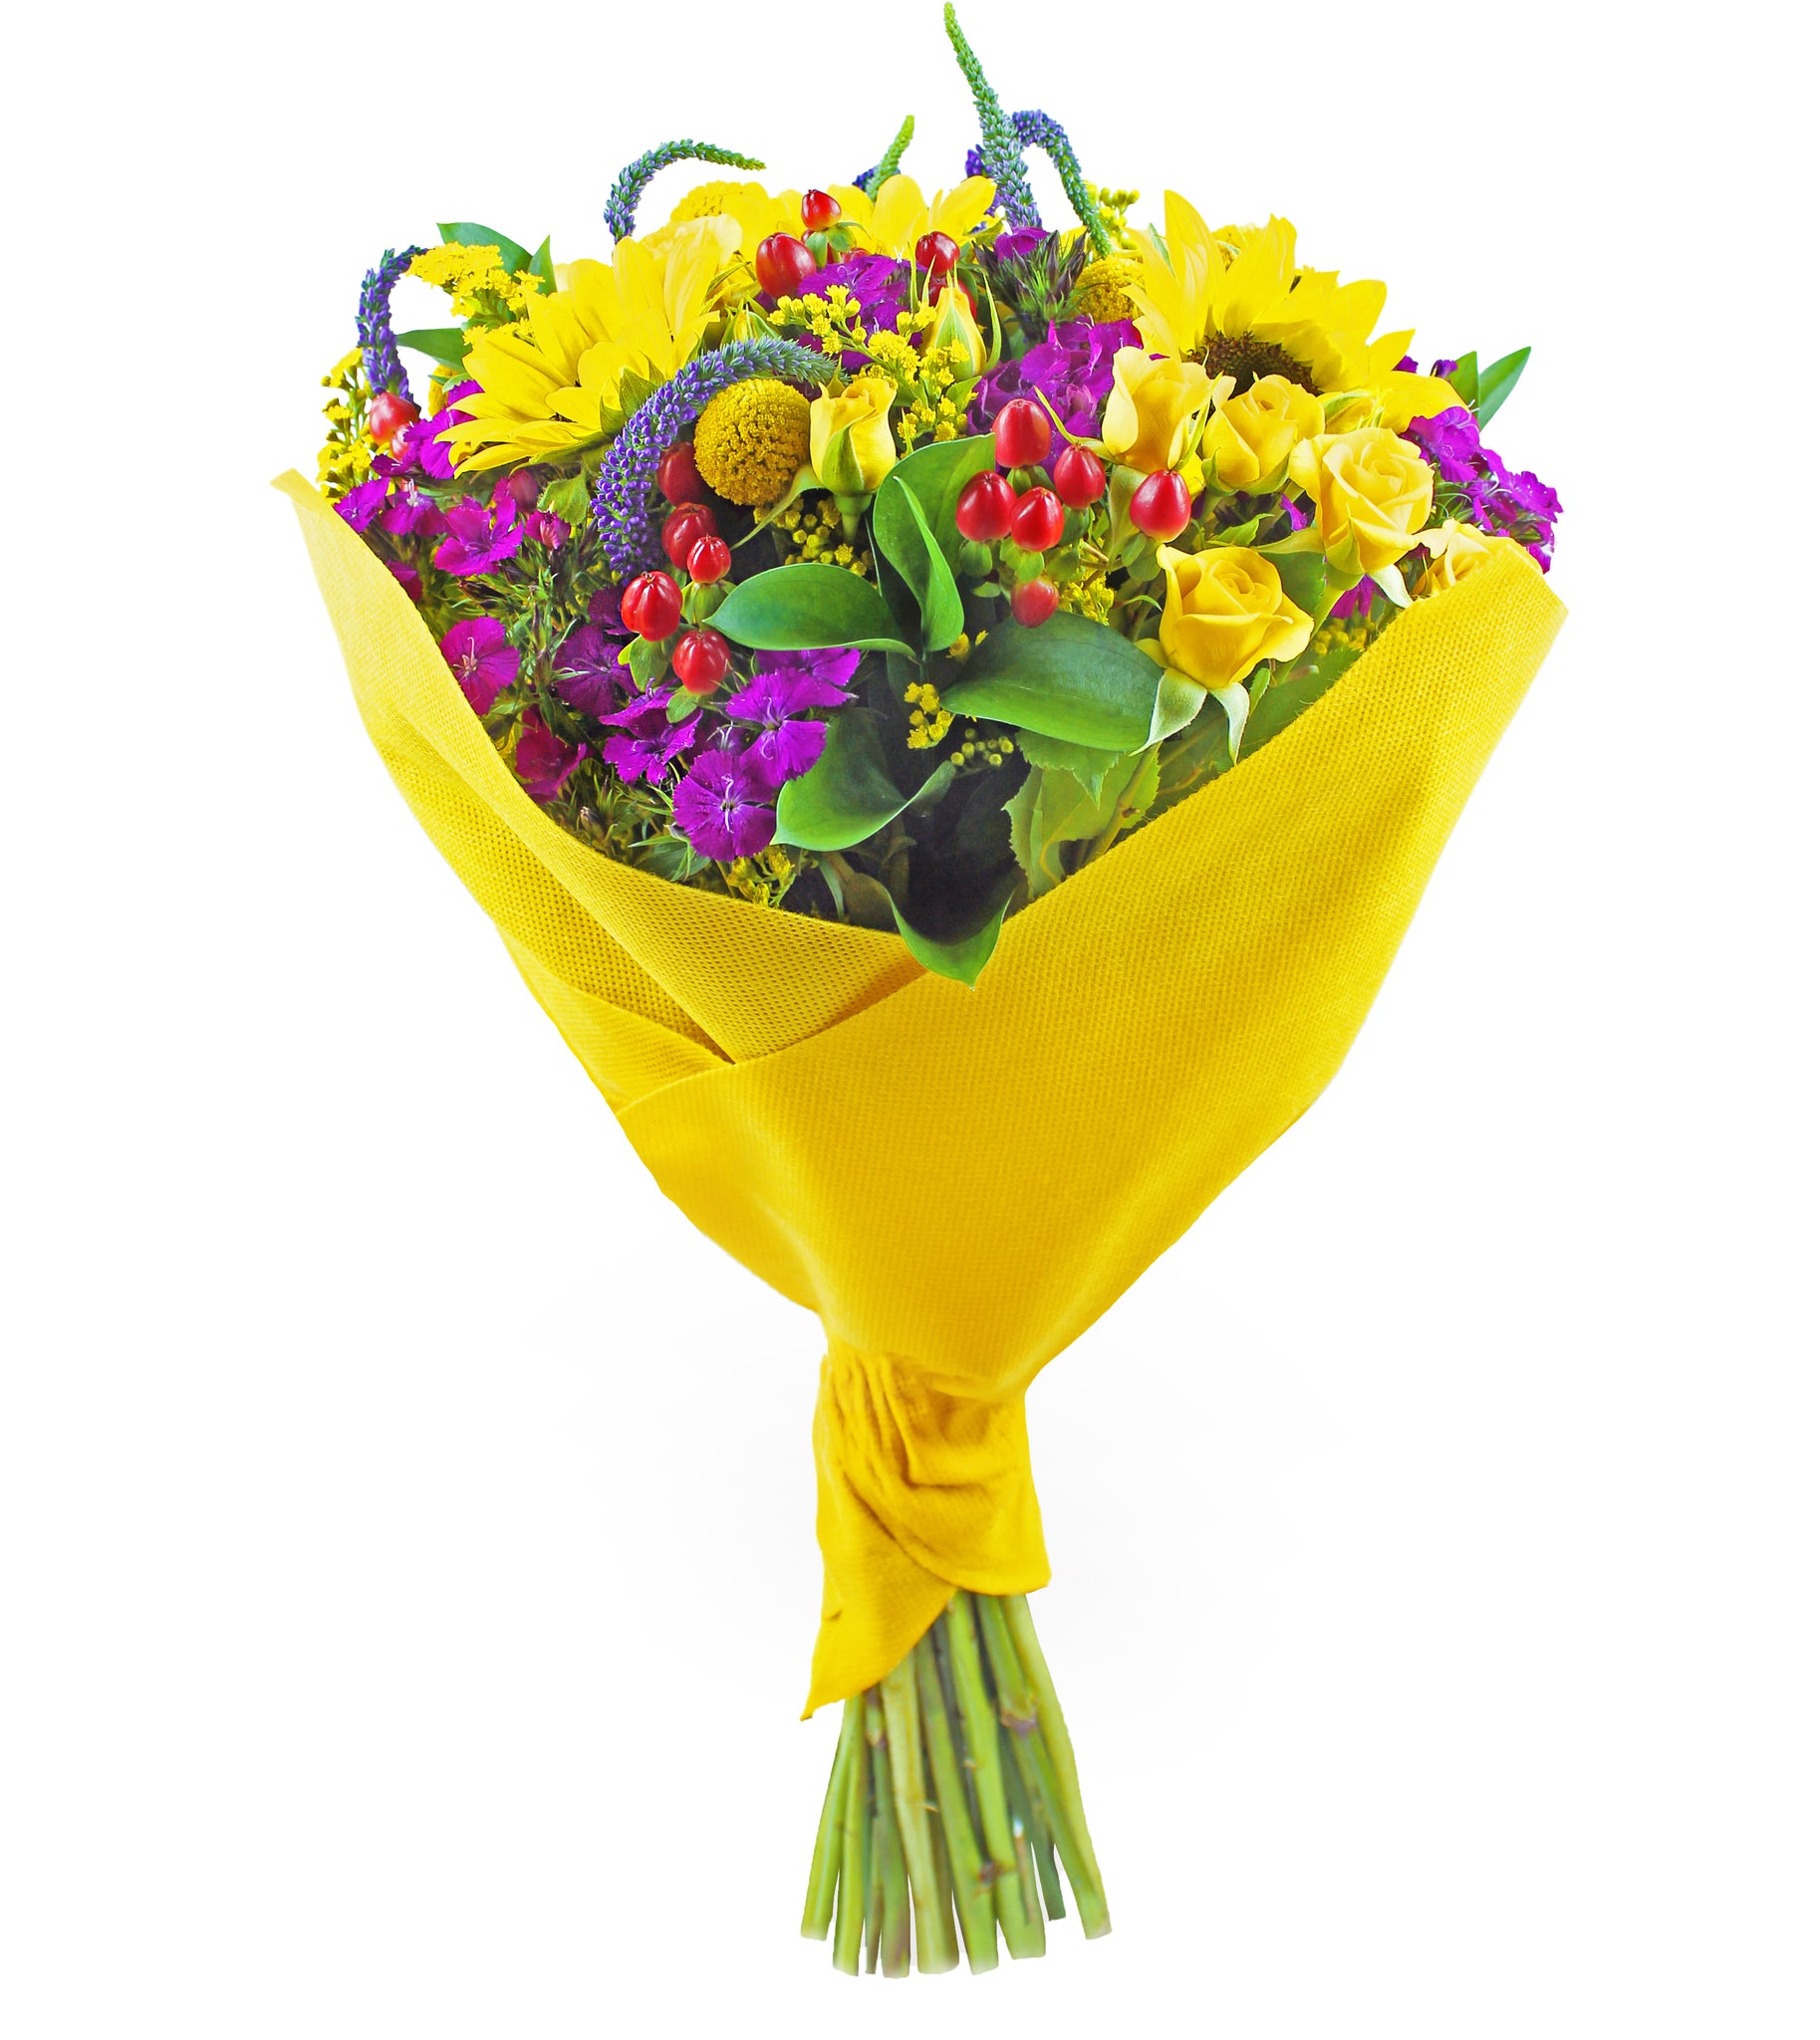 Floral arrangement of 38 bright blooms in yellow, purple and red shades. Delivered in yellow eco-friendly wrapping and grown in the mountains of Ecuador.